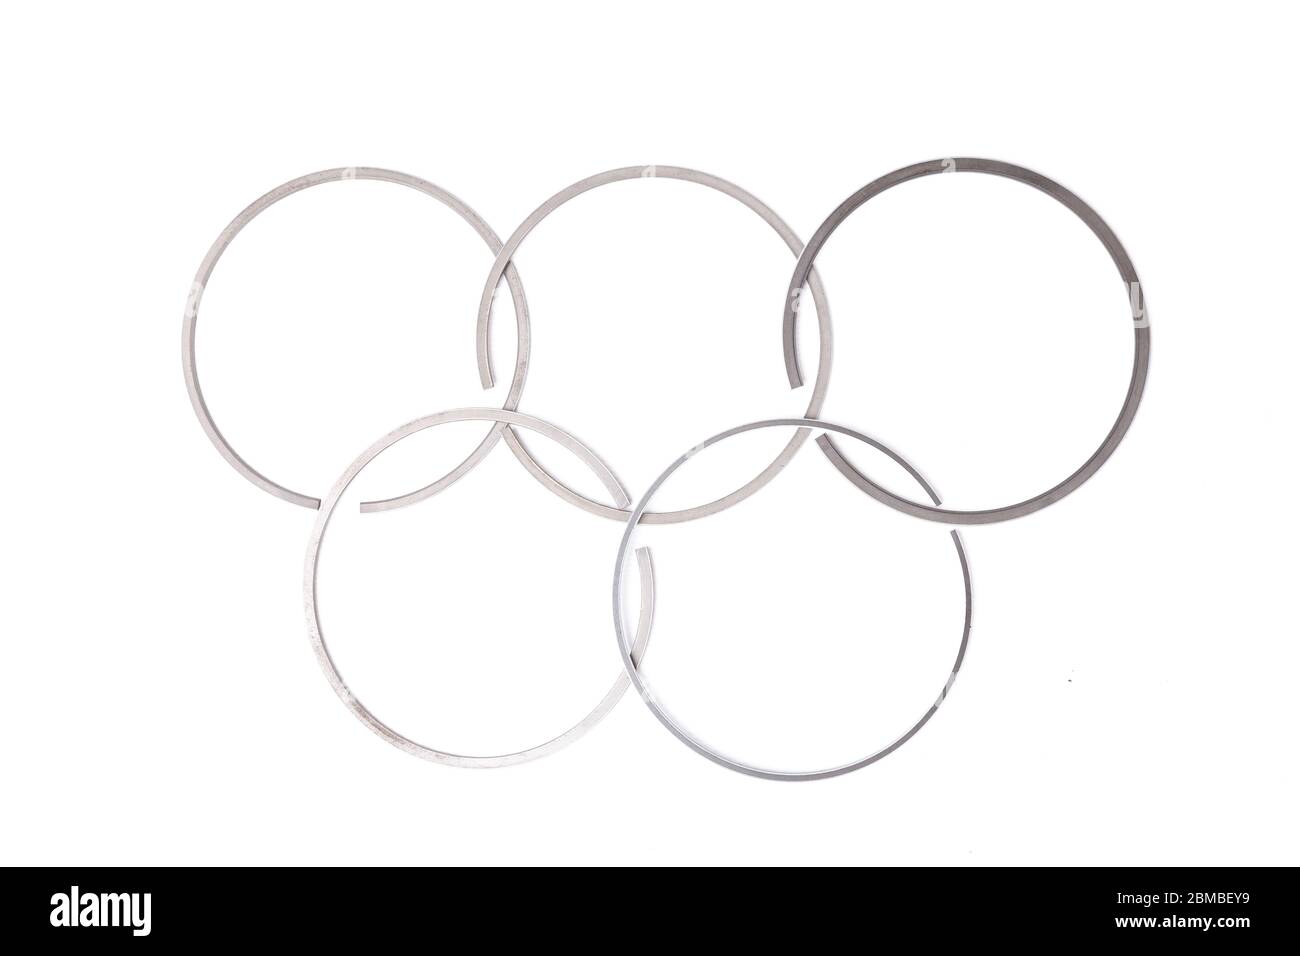 metal piston rings of a car engine placed on a white background in the form of an olympic symbol designer pattern creativity mechanic at work 2BMBEY9